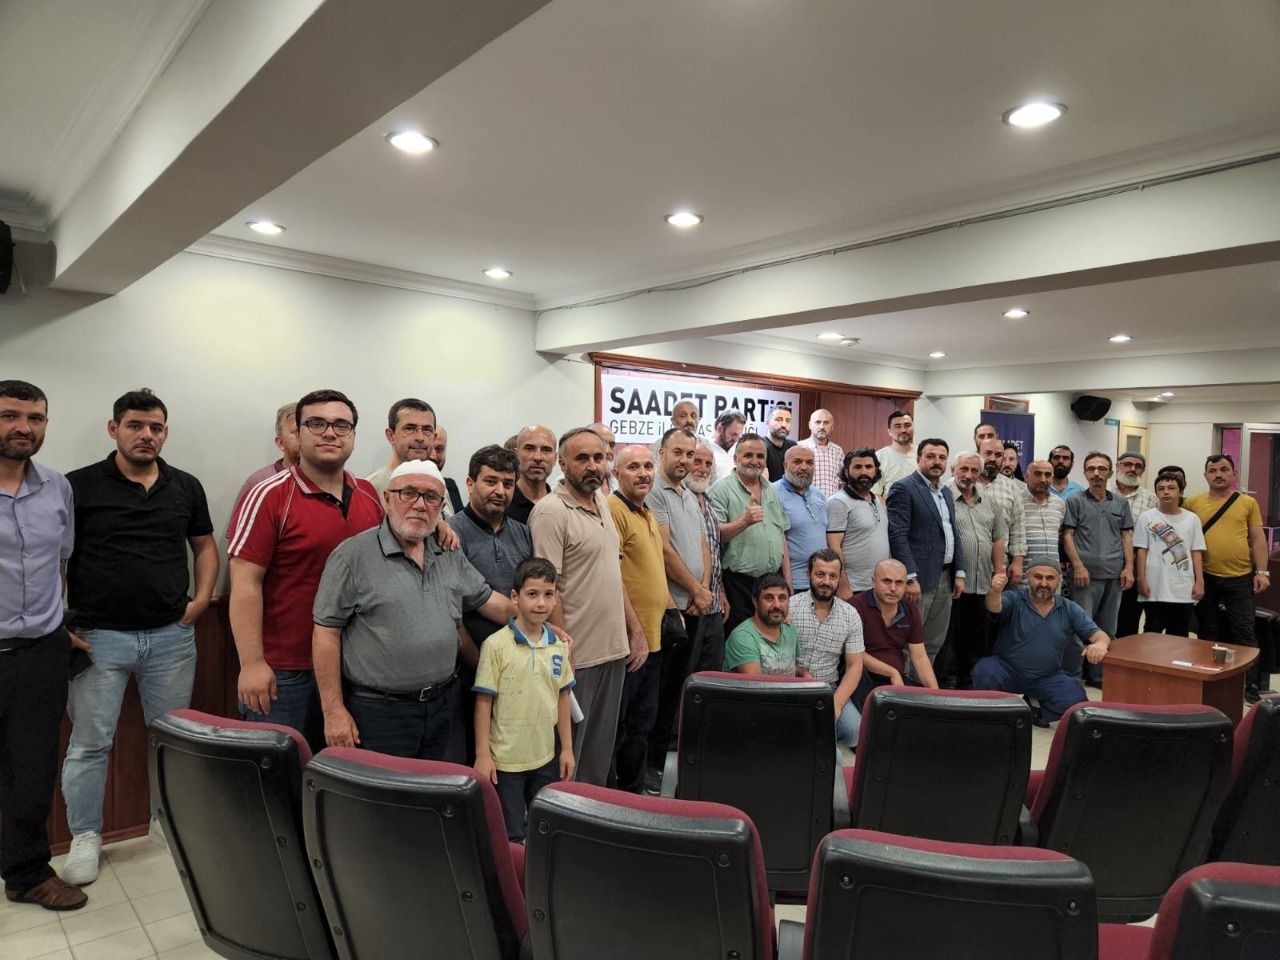 Saadet Party Gebze Presidency holds its monthly council meeting!